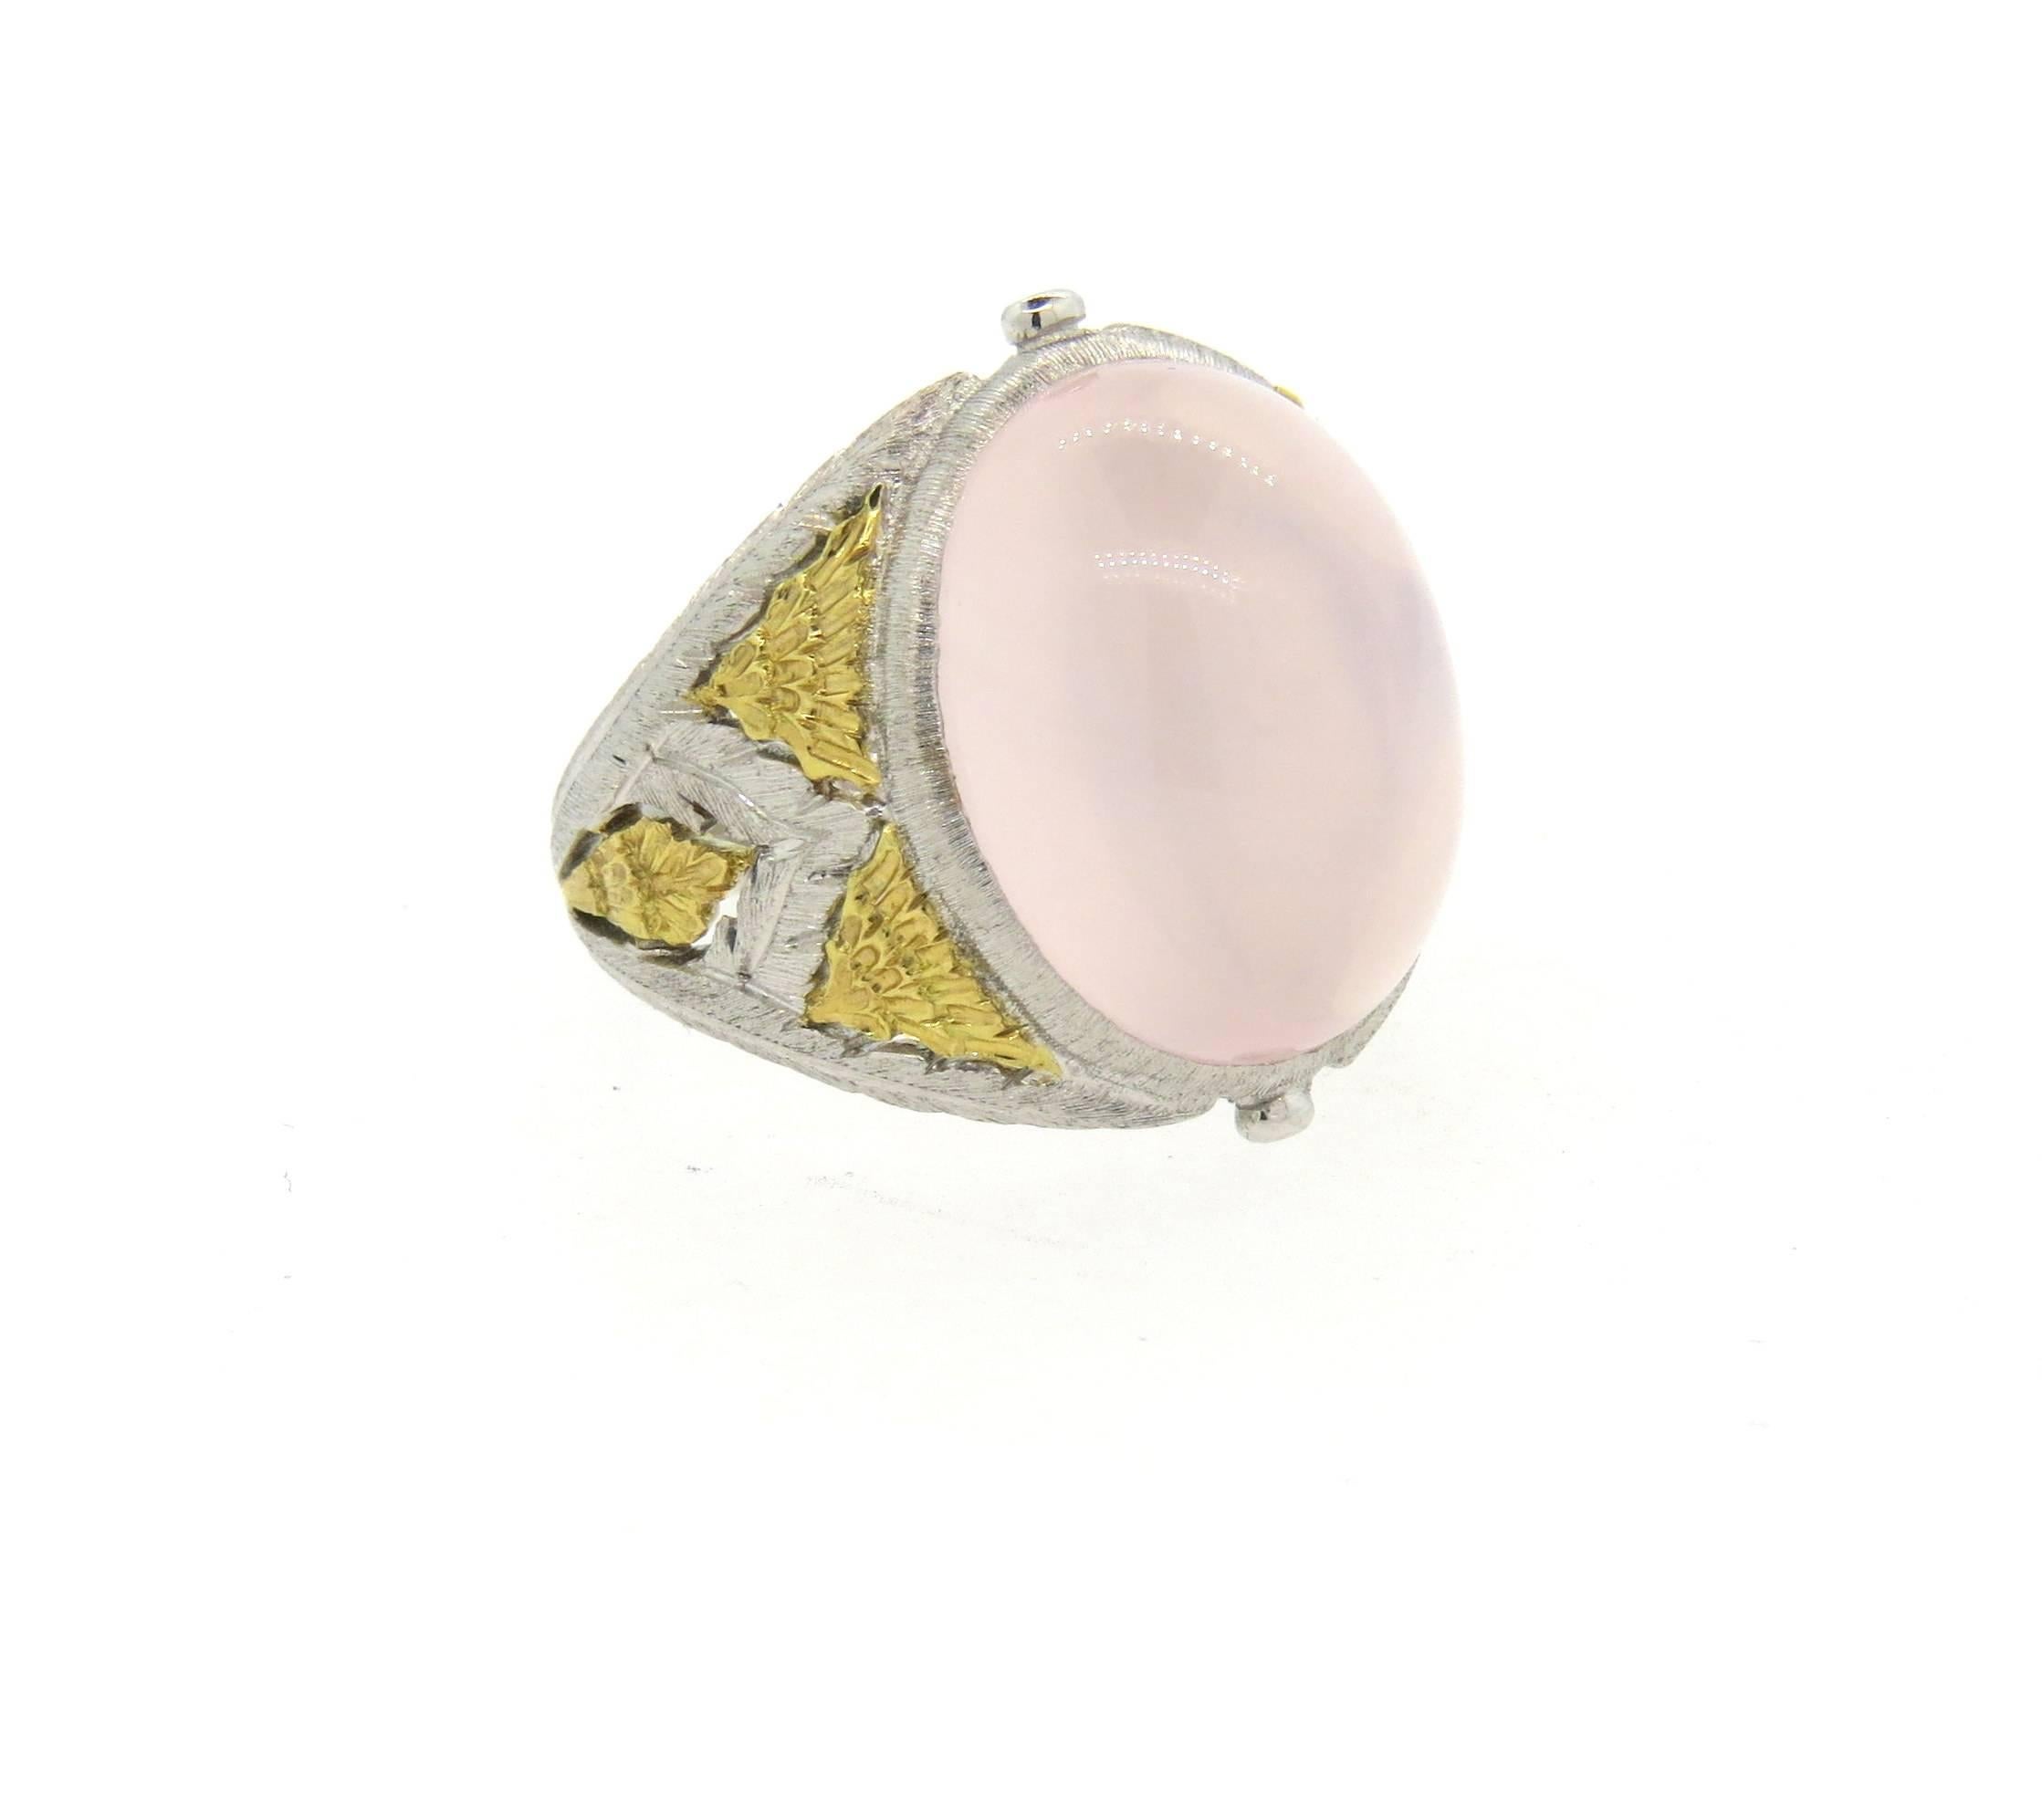 18k white and yellow gold dome ring, crafted by Buccellati, set with an approximately 11.5ct rose quartz cabochon as a centerpiece. Ring is a size 6 1/2, ring top is 19mm wide. Marked 750, Buccellati, Italy. Weight of the piece - 9.2 grams 
Comes